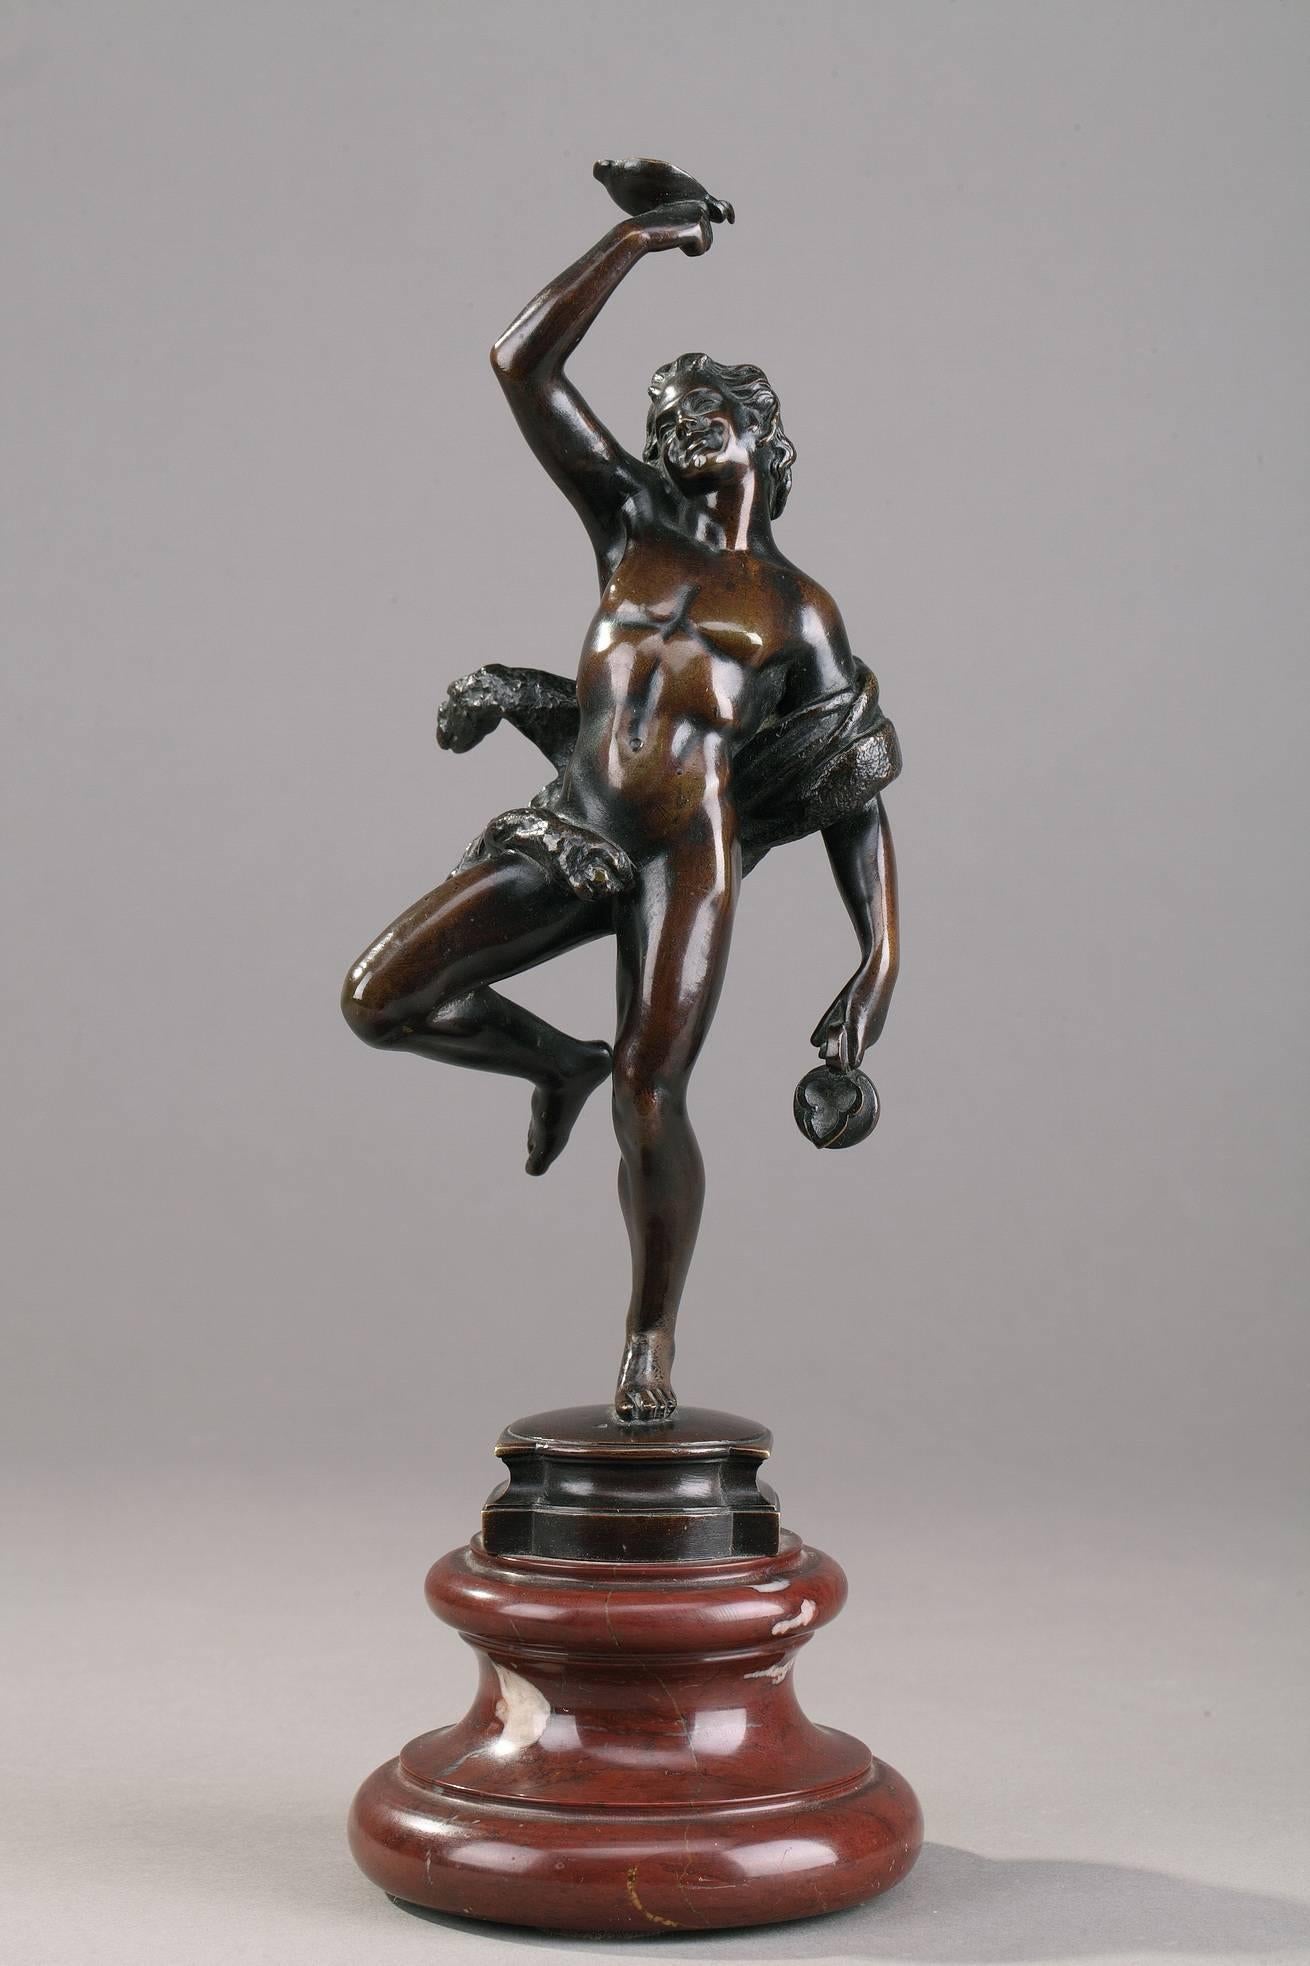 Pair of patinated bronze statues featuring two dancers from the procession of Bacchus (Dionysus), the god of wine, drunkenness, excess, and nature in Greco-Roman mythology. The young man holds the cup and the decanter whereas the woman plays the